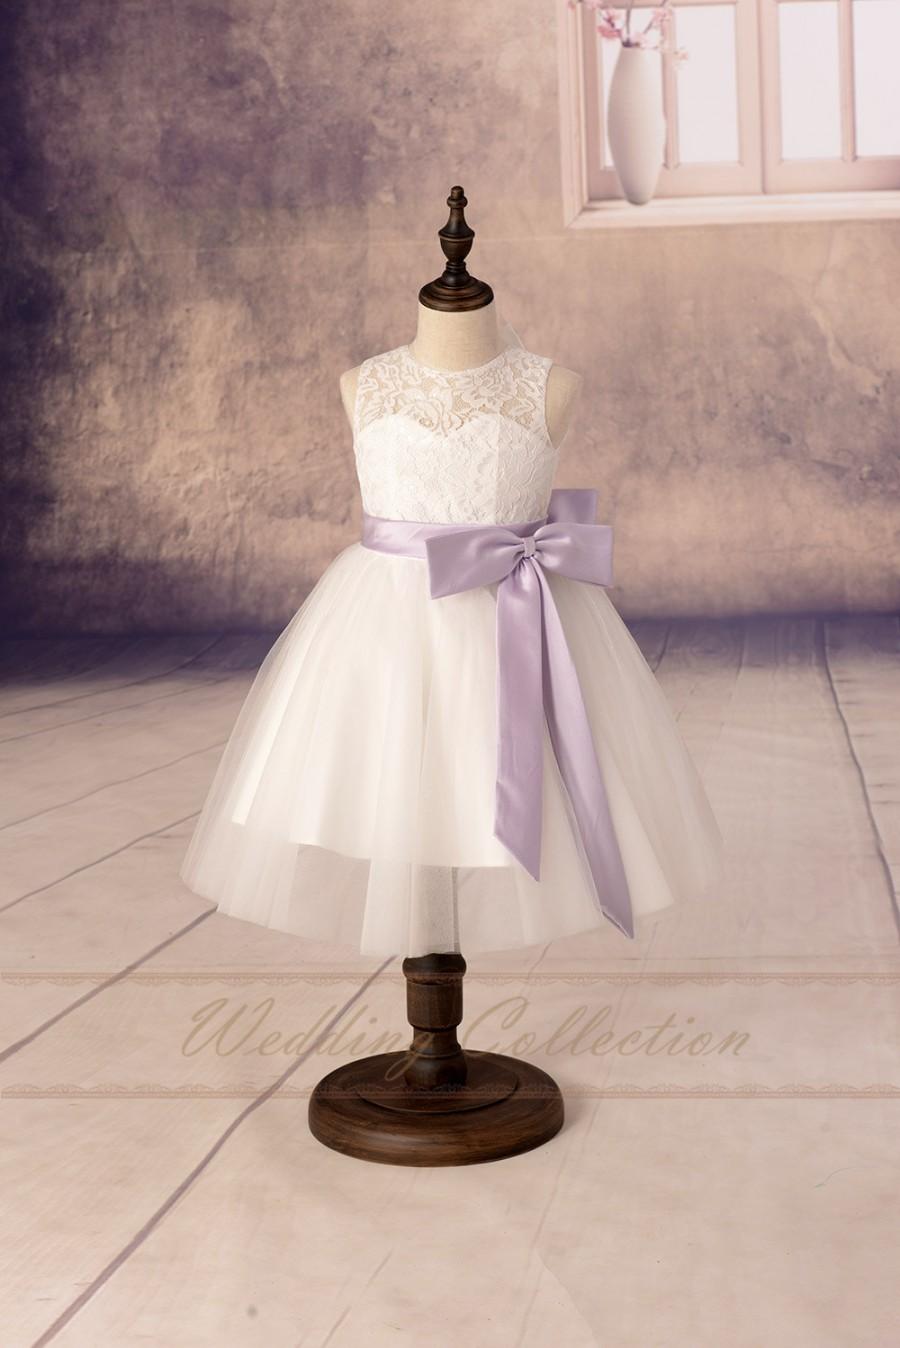 Wedding - Lace Flower Girl Dresses, Tulle Flower Girls Dress With Purple Sash and Bow (sandovalceja23)